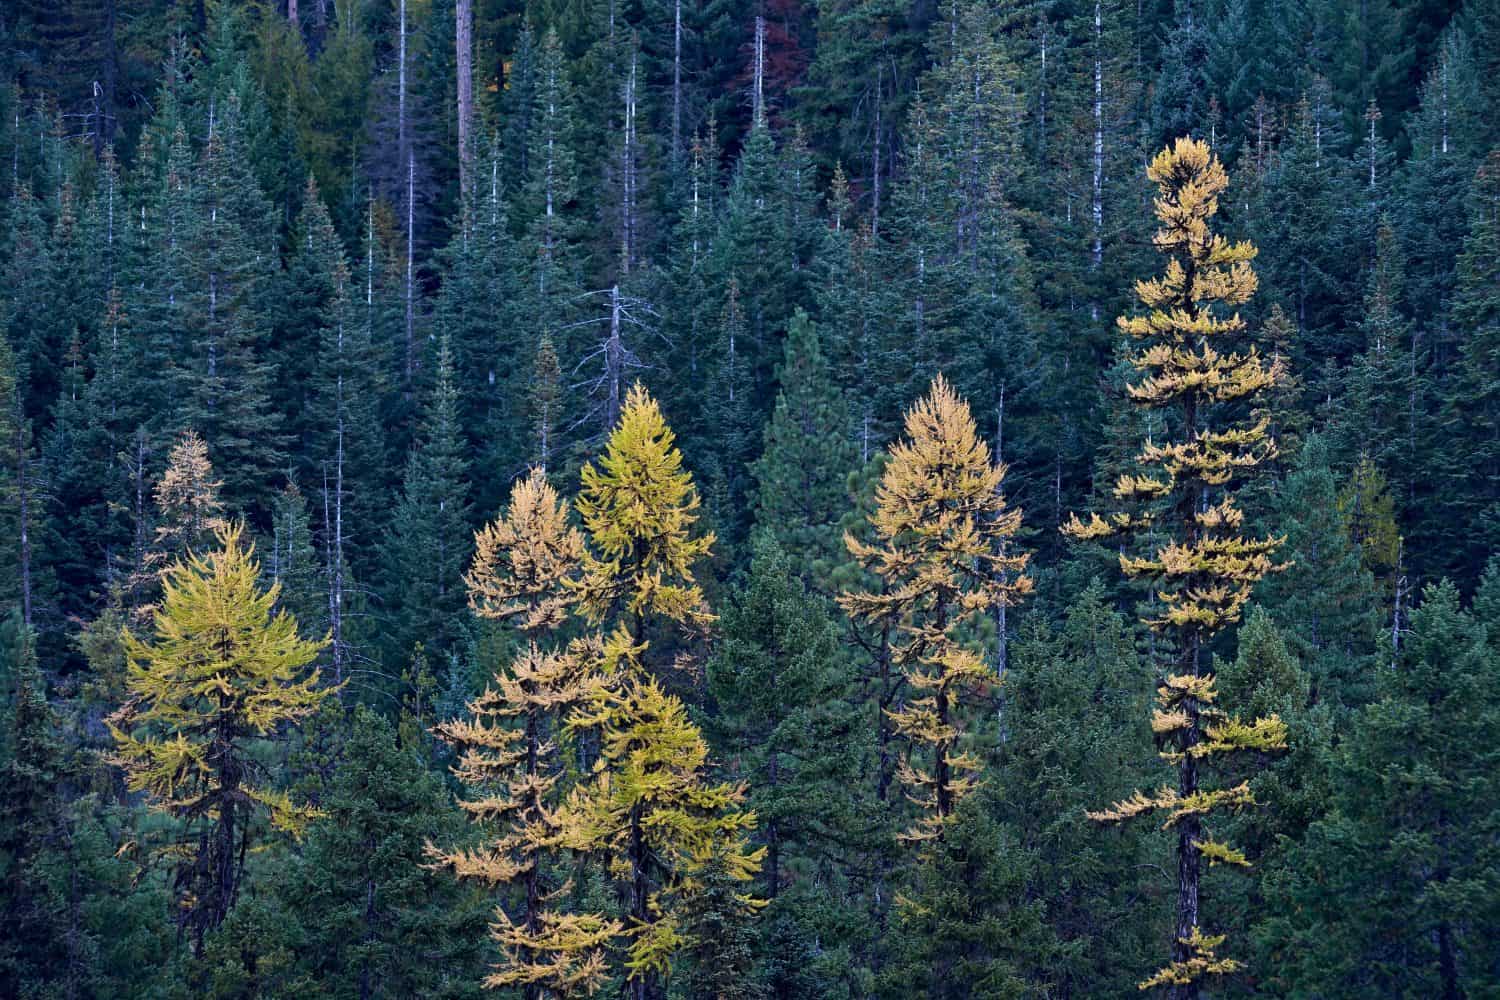 Western larch (larix occidentalis) in the fall, mount hood national forest, oregon, united states of america, north america